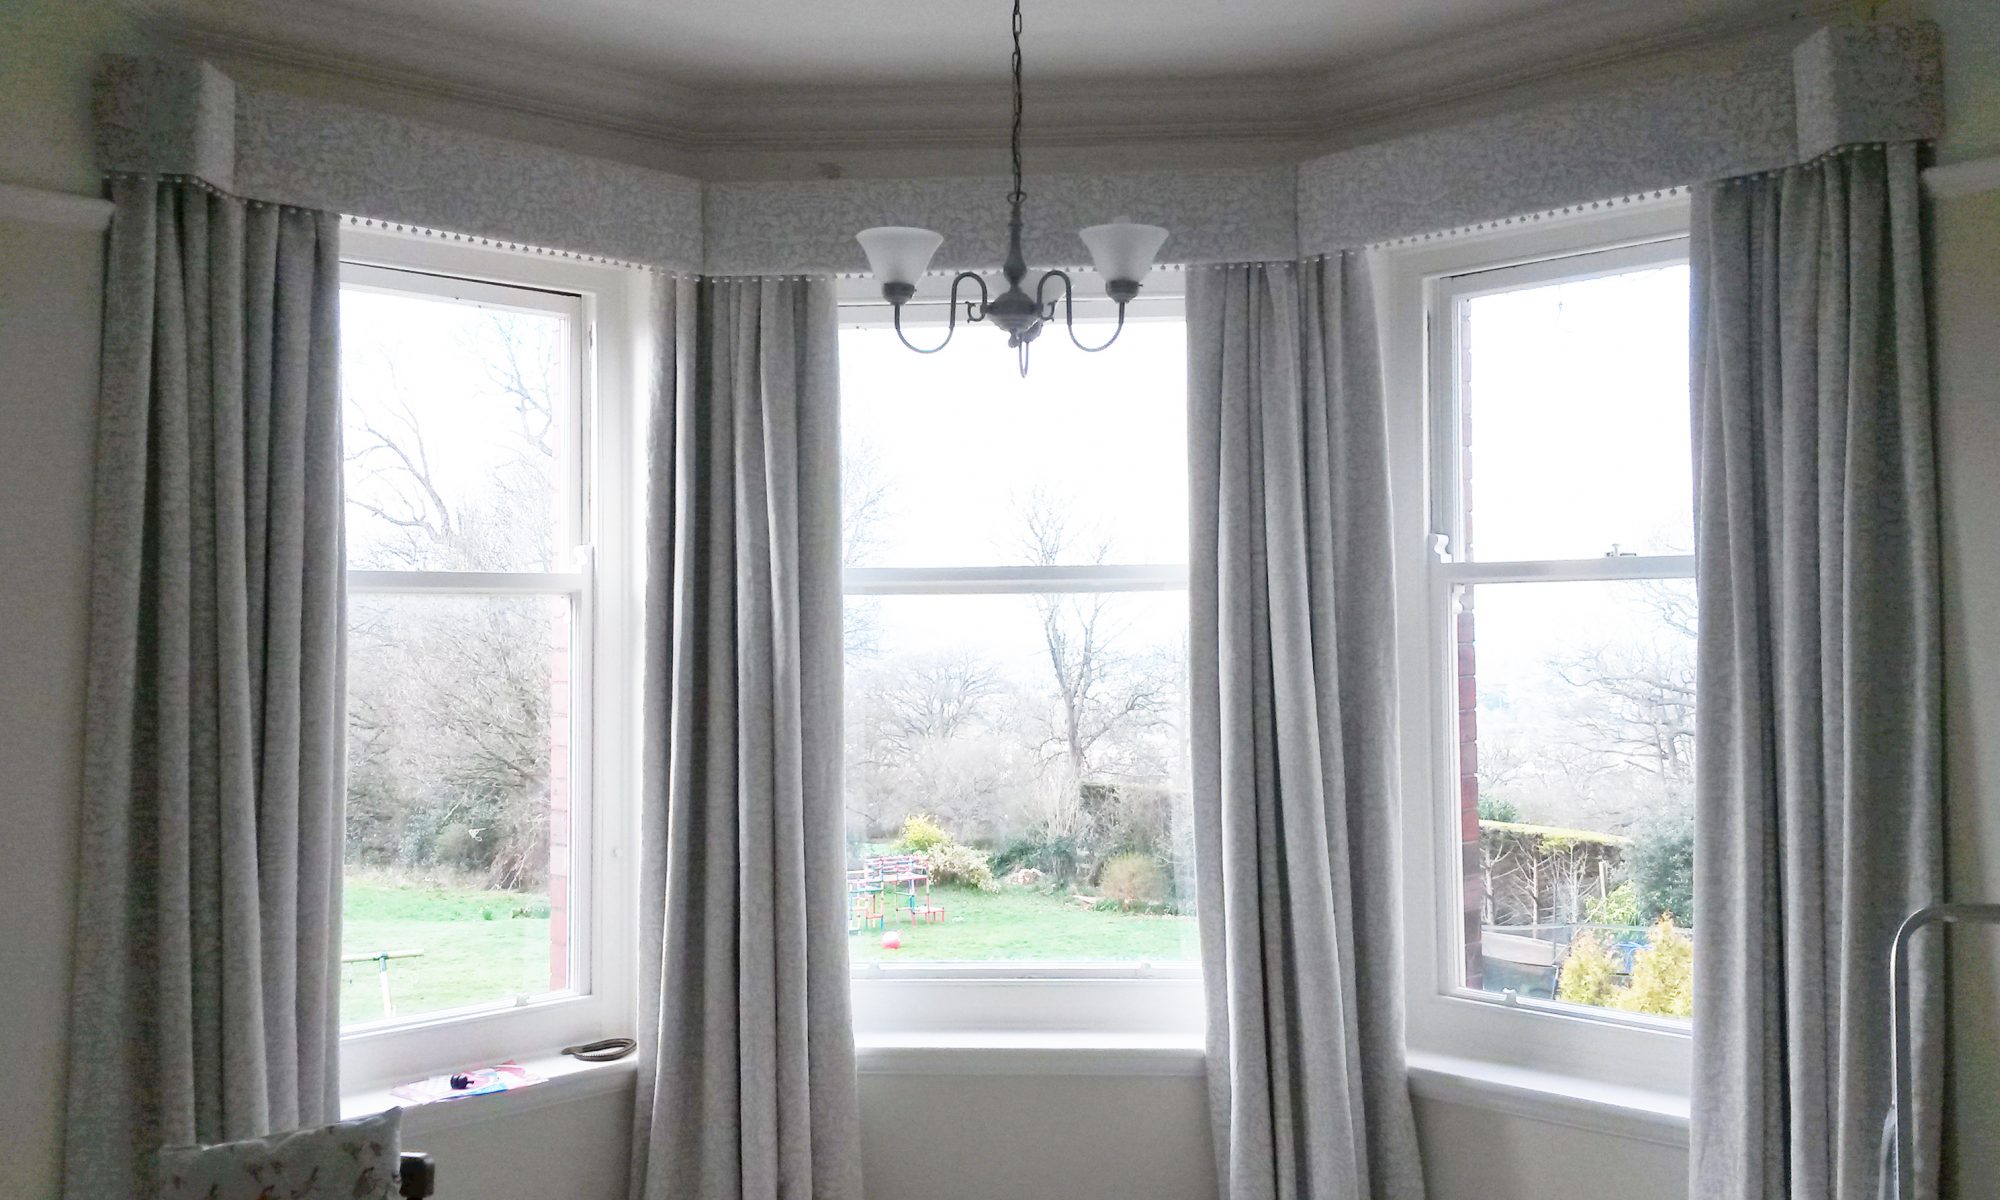 Straight pelmet with pop pom trim in bay window. Morris and Co Pure fabric